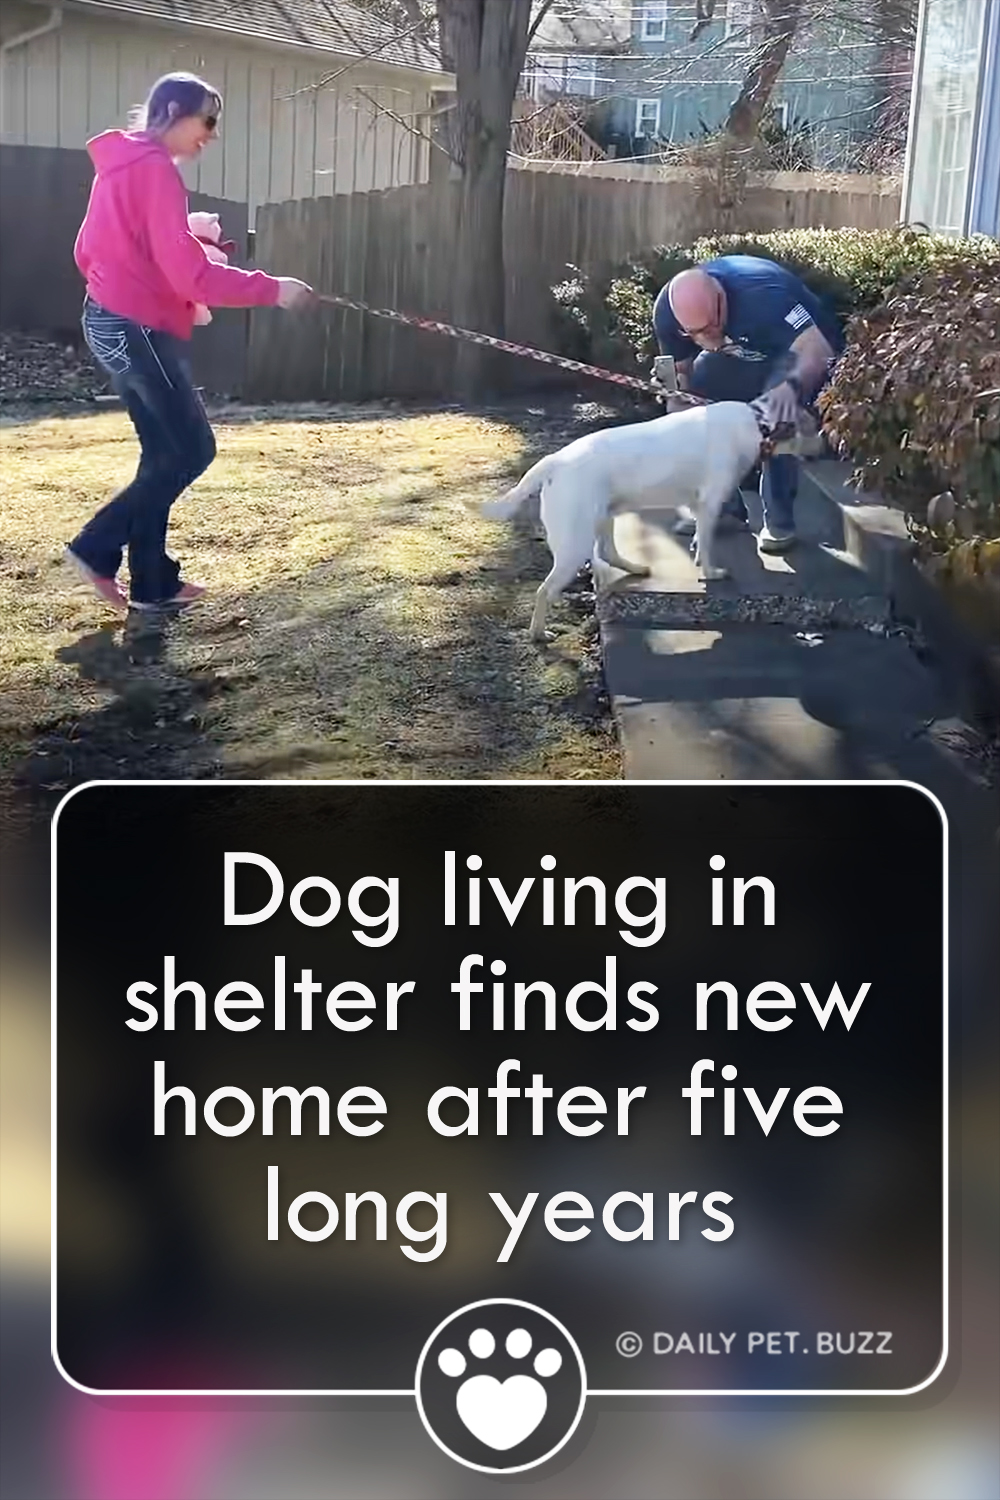 Dog living in shelter finds new home after five long years